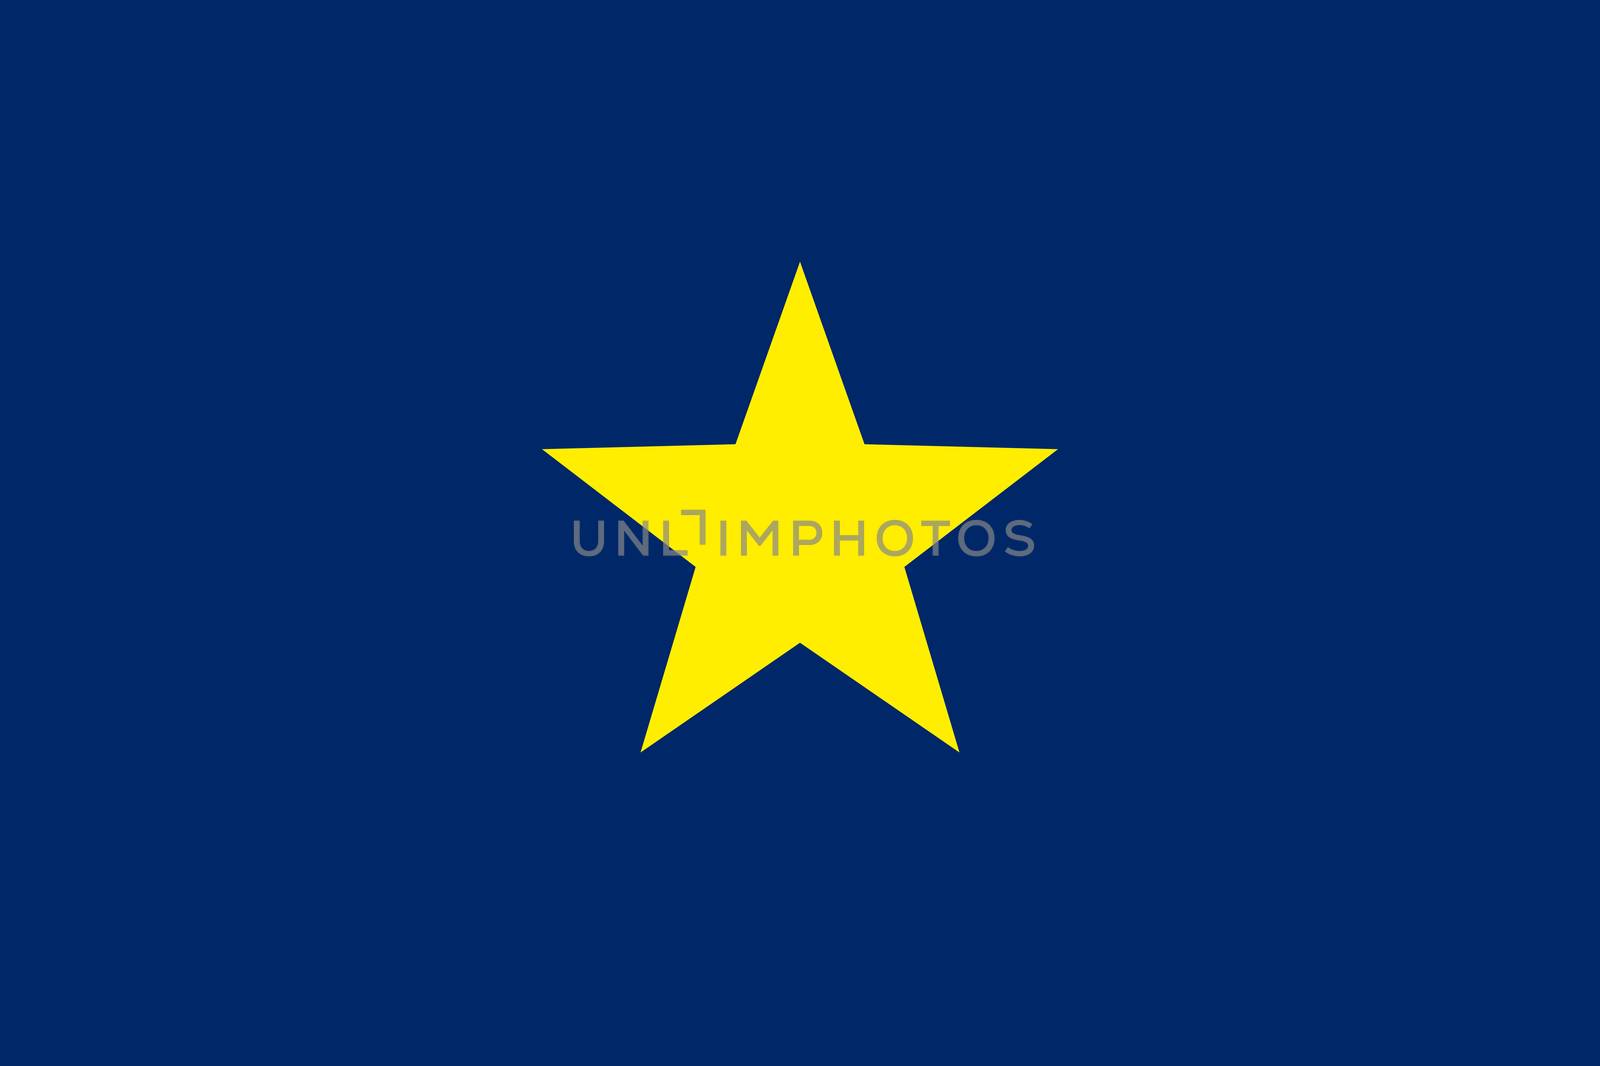 old flag of texas republic united states of america state